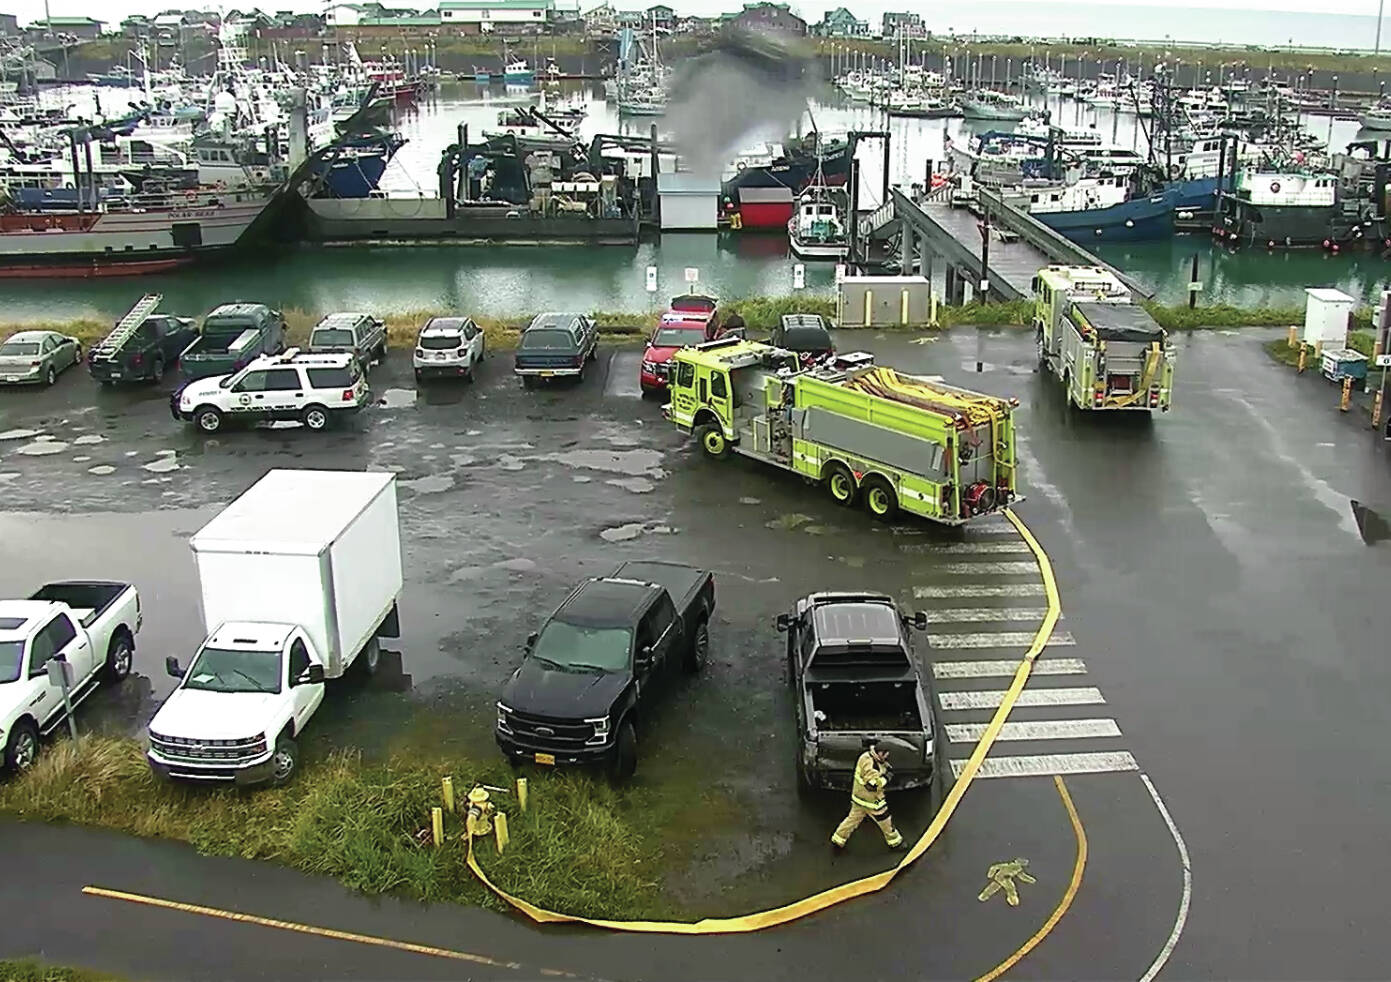 Photo provided by a Homer Harbor surveillance camera
Fire crew respond to a vessel fire on Oct. 13 in the Homer Harbor.